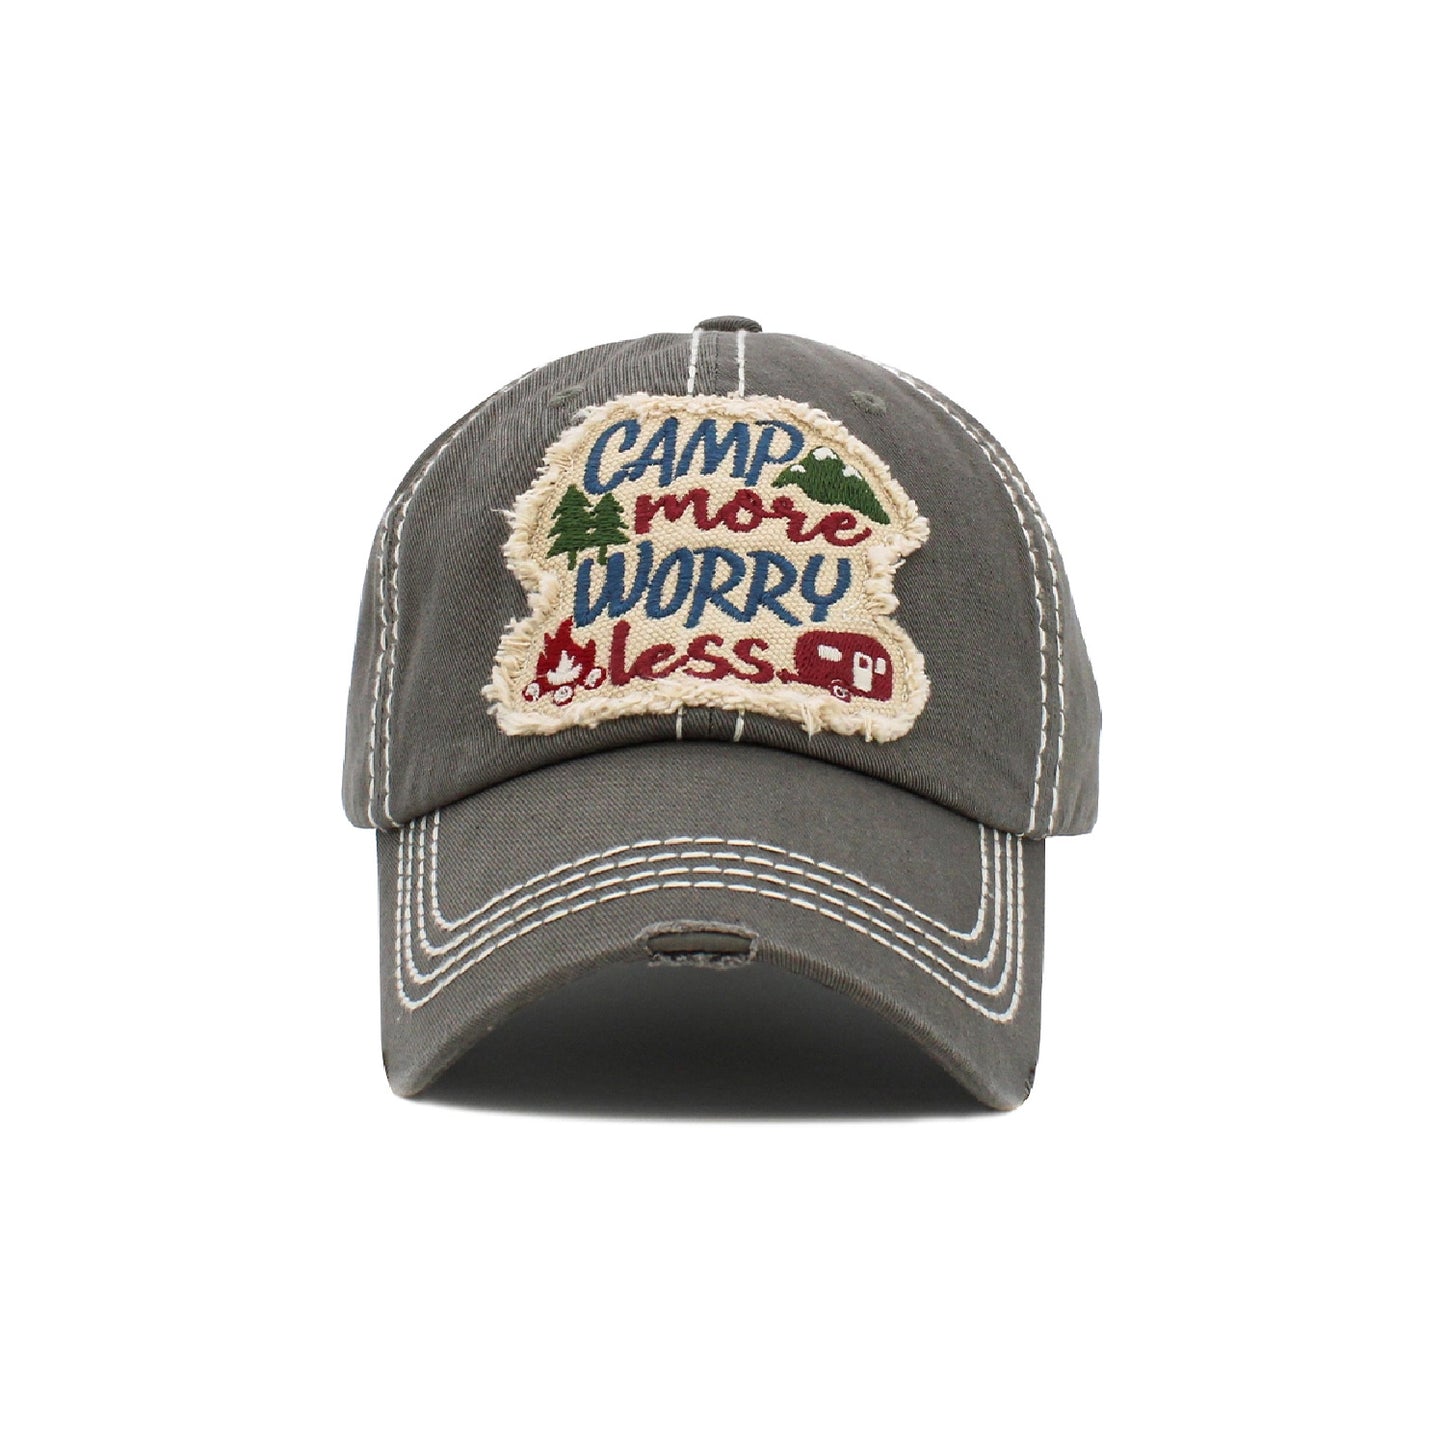 Camp More Worry Less Vintage Ballcap